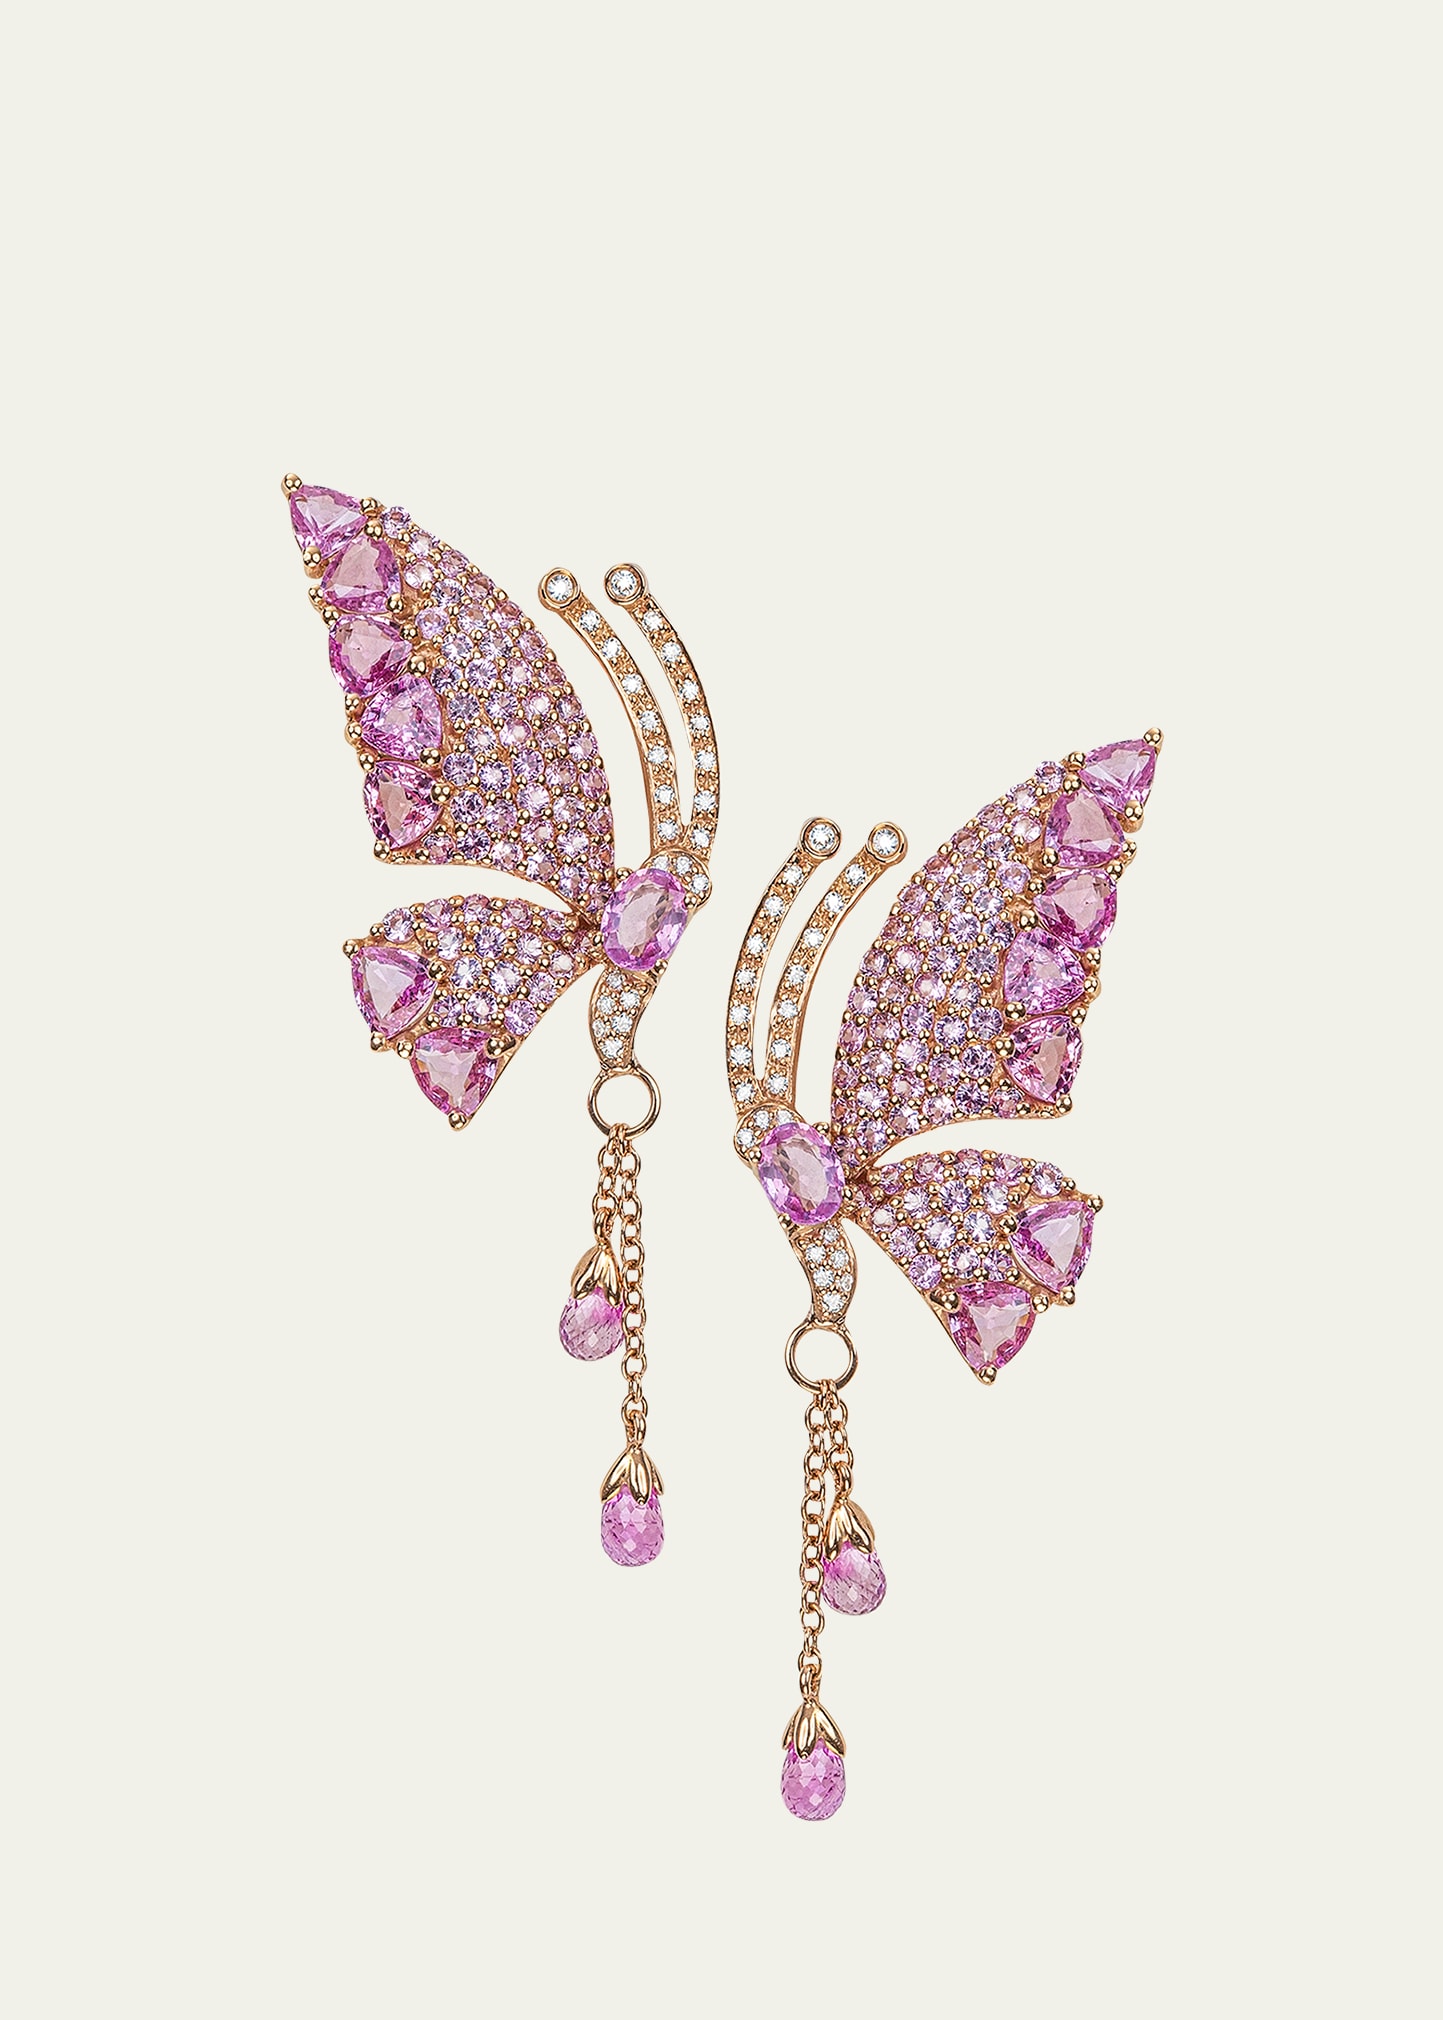 Rose Gold Pink Sapphire Earrings from The Butterfly Collection